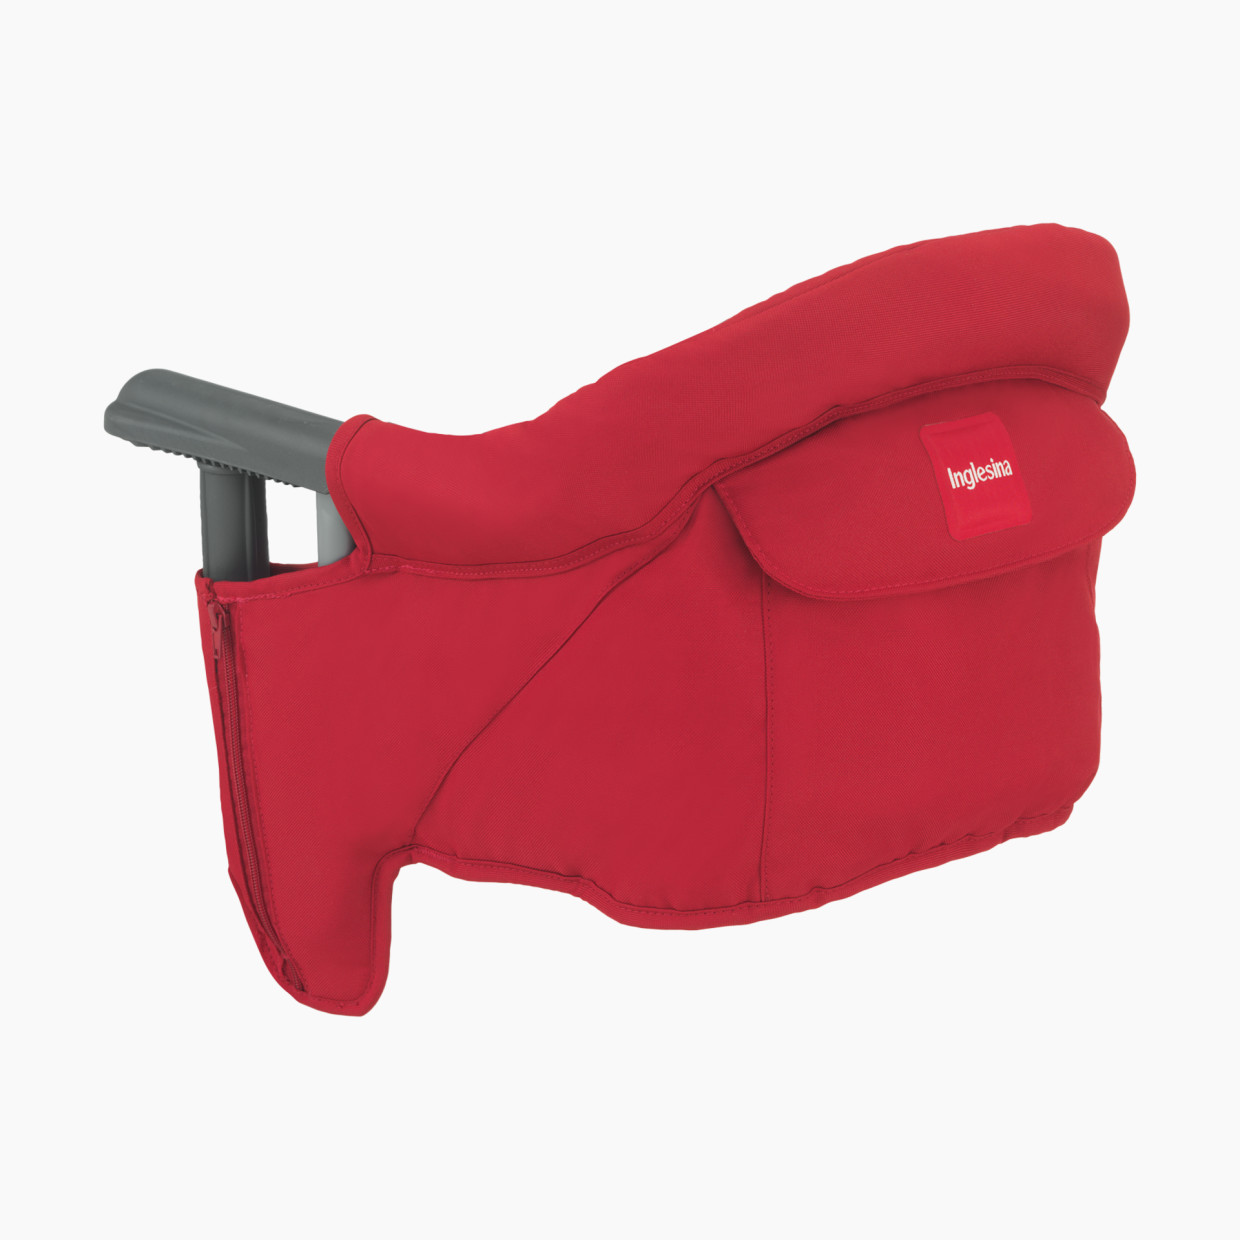 Inglesina Fast Table Chair - Red.